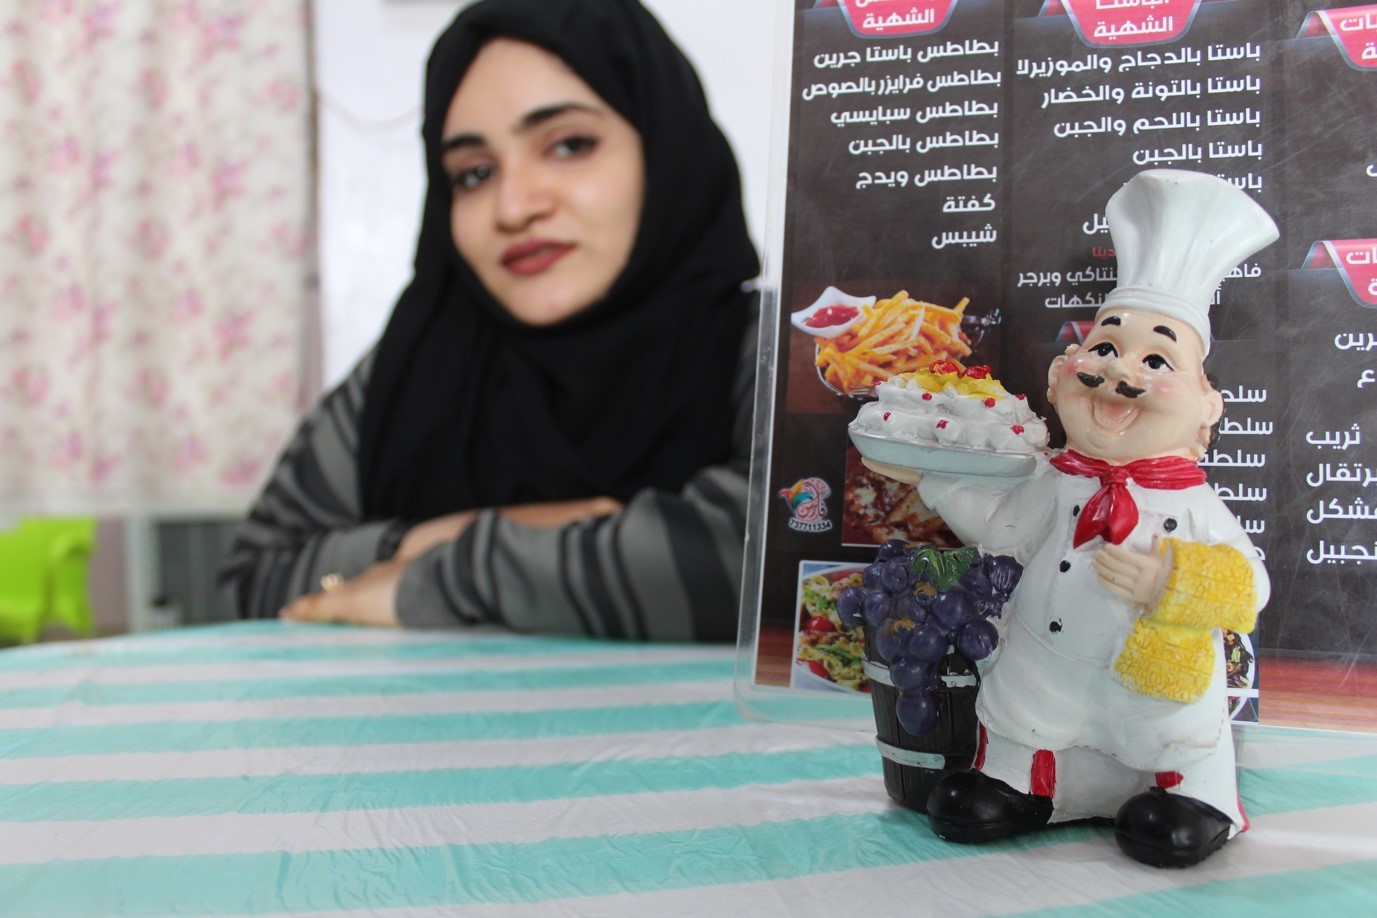 A woman sitting at a table with a chef figurine